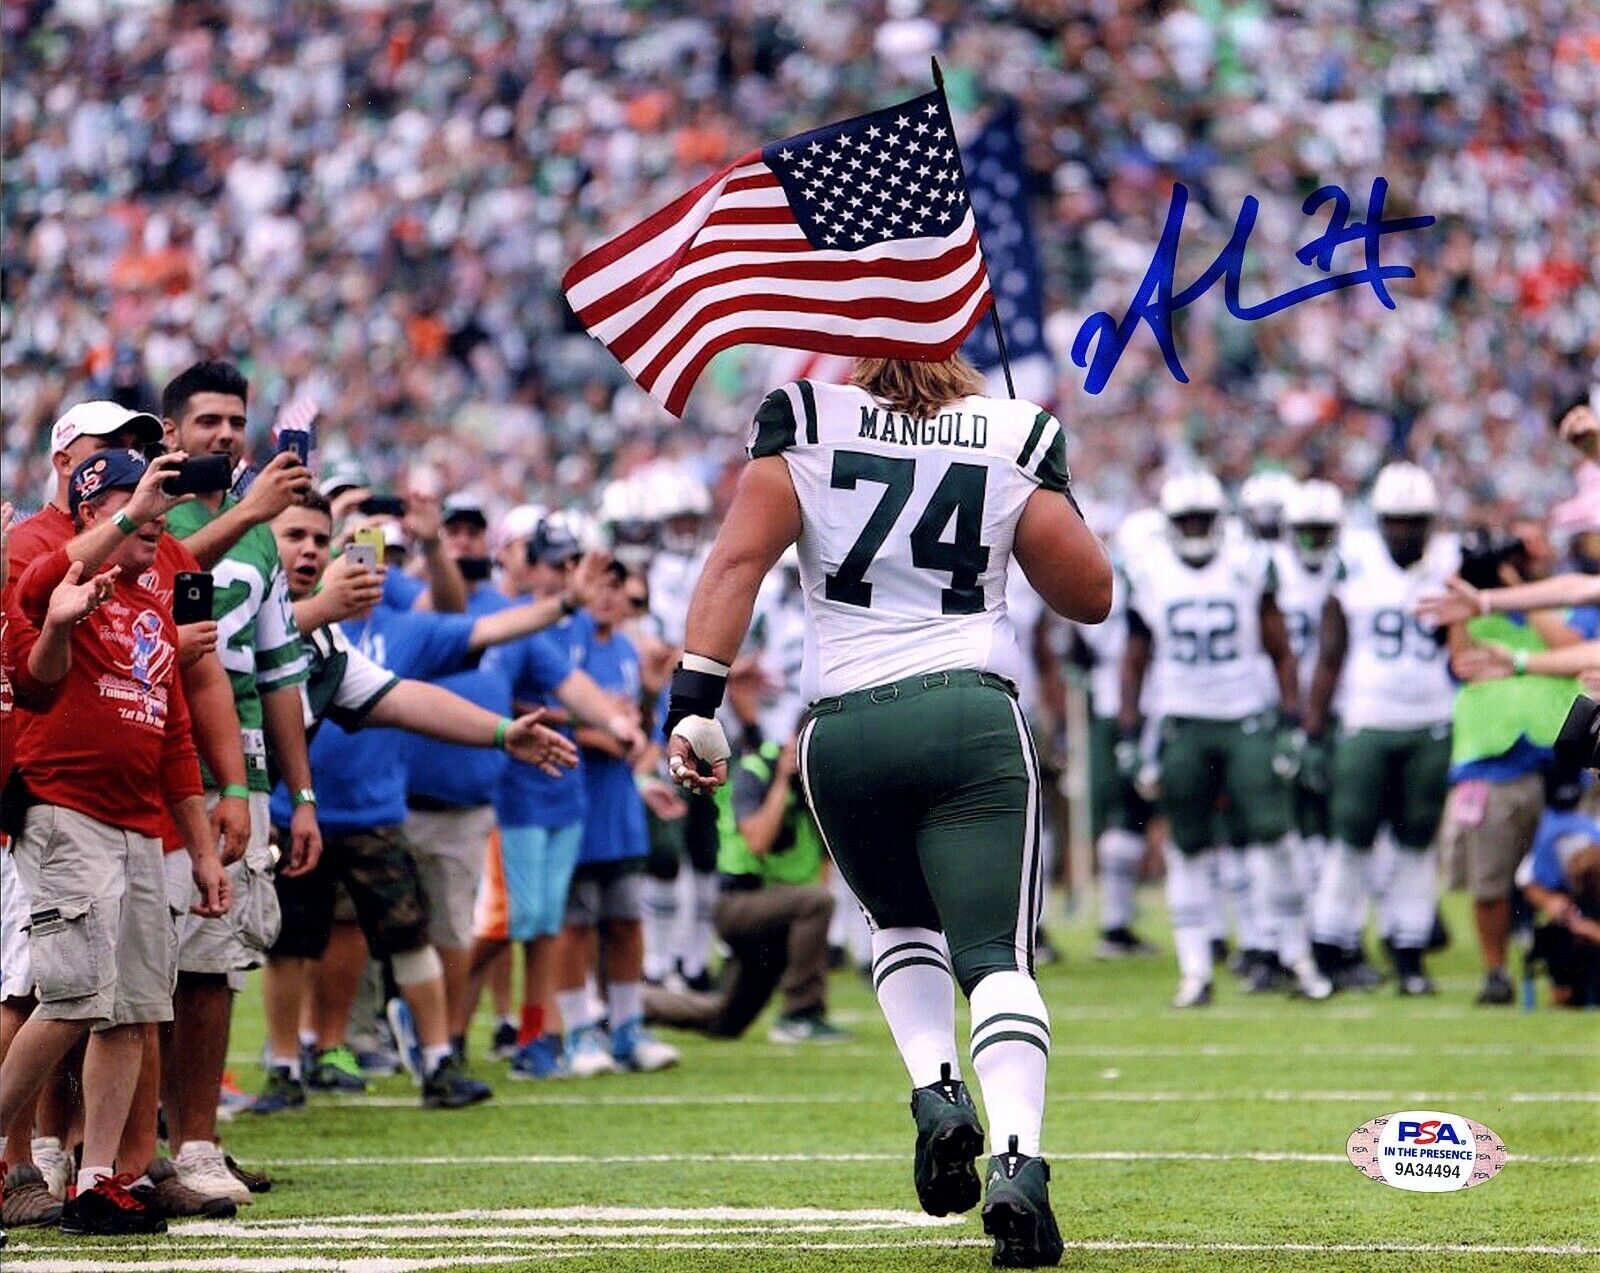 NICK MANGOLD Autograph Hand SIGNED 8x10 N.Y. JETS FLAG Photo Poster painting PSA/DNA Certified